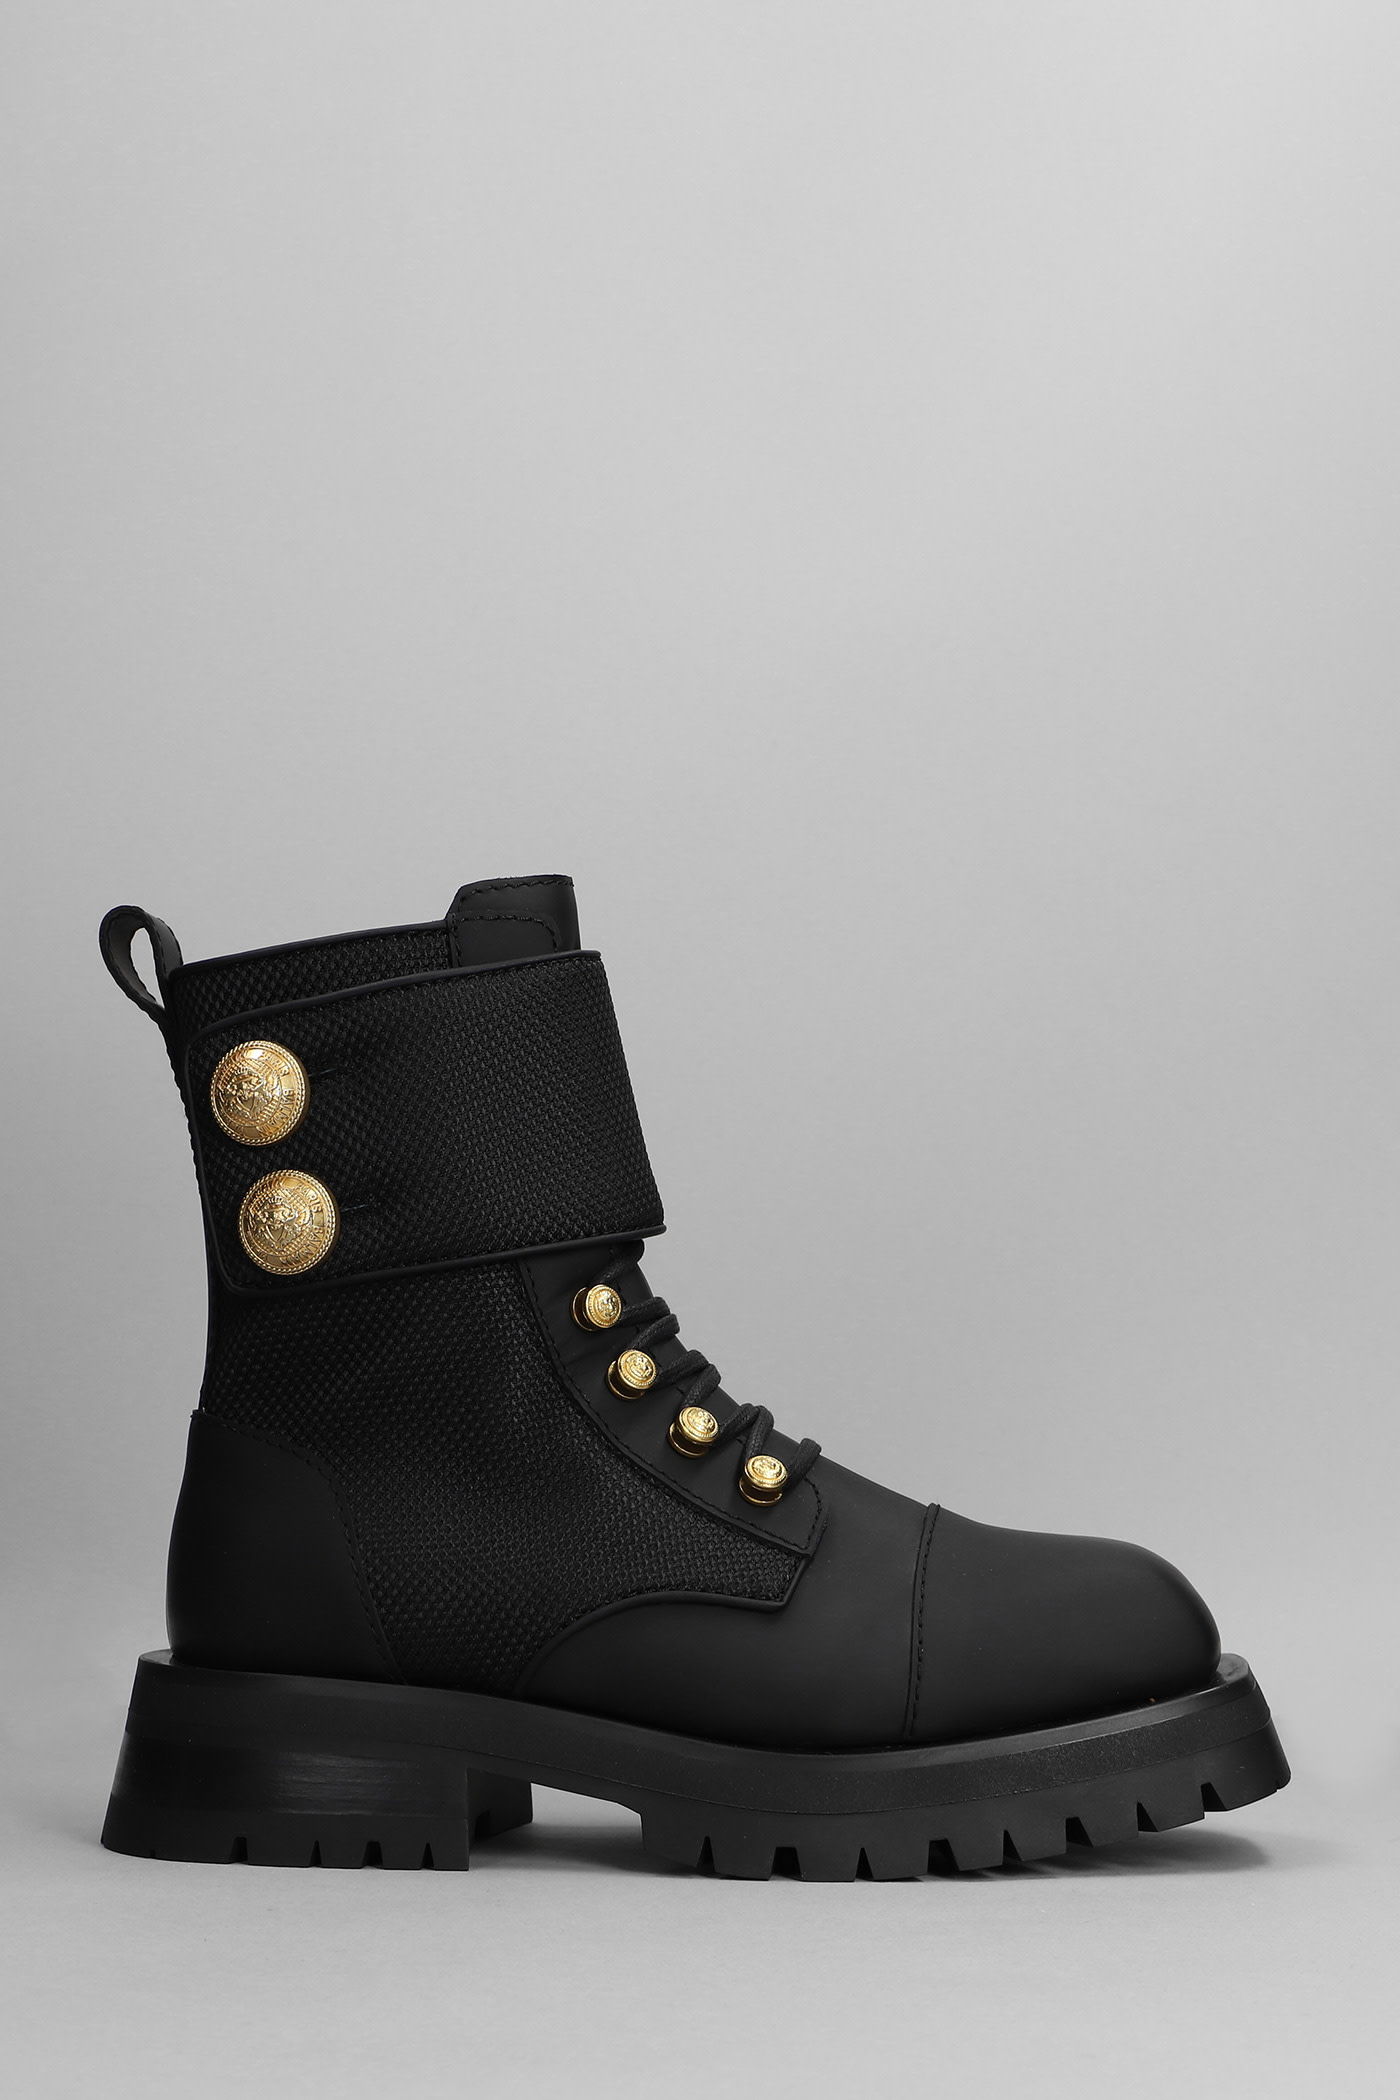 Balmain Combat Boots In Black Leather